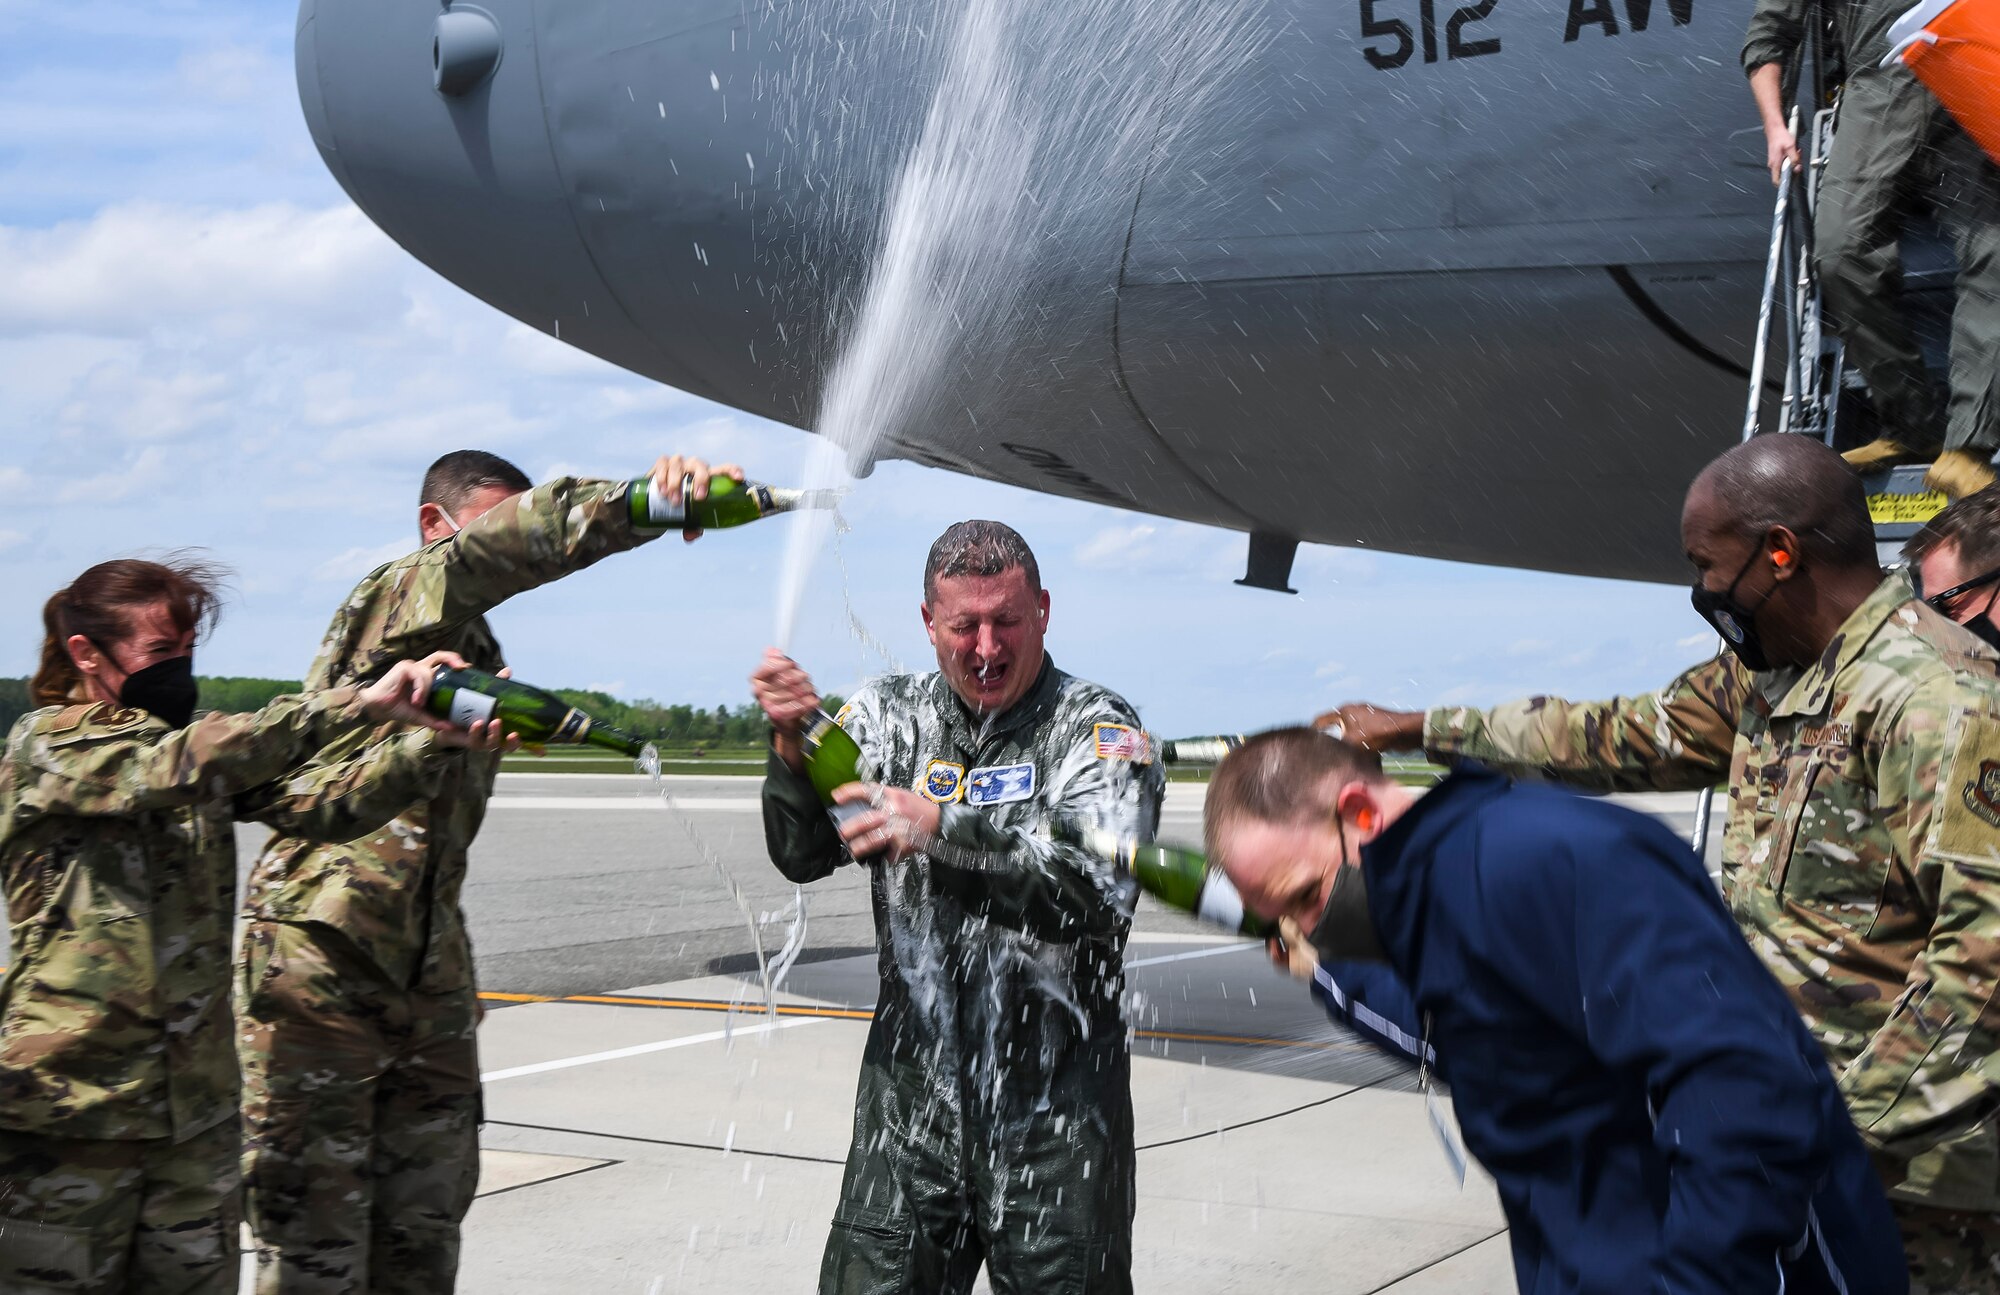 Col. Matthew Jones, 436th Airlift Wing commander, celebrates with colleagues following his fini flight at Dover Air Force Base, Delaware, May 4, 2021. A “fini flight” is an Air Force tradition where an Airman and their family celebrate their final flight. (U.S. Air Force photo by Airman 1st Class Stephani Barge)